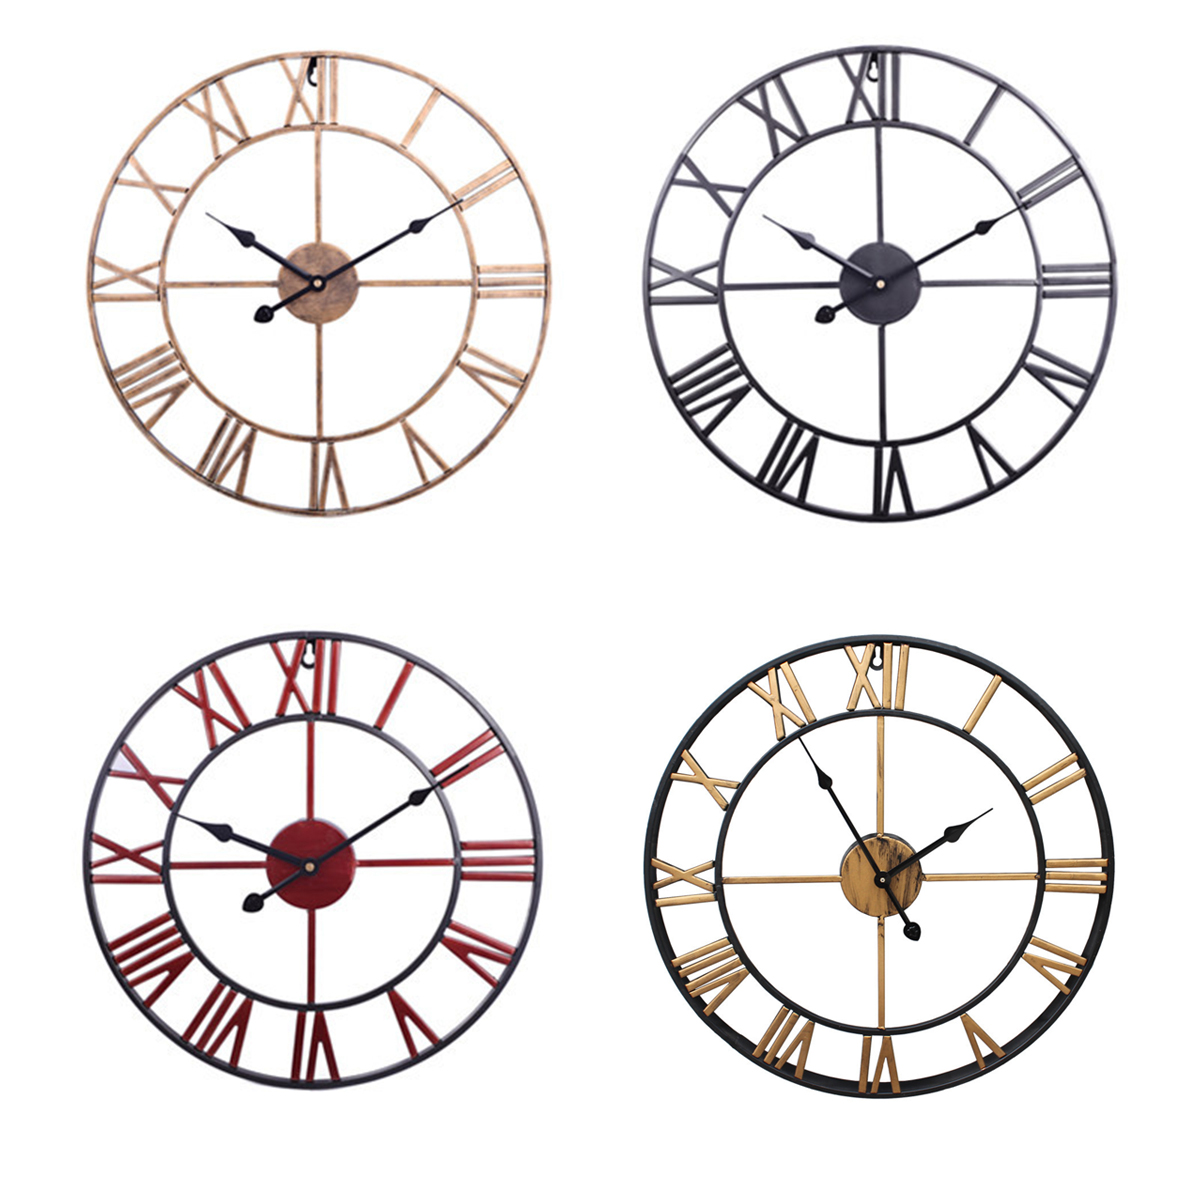 Find Extra Large Wall Clock 18 Inch Vintage Rustic Oversized Metal Wall Clocks for Sale on Gipsybee.com with cryptocurrencies